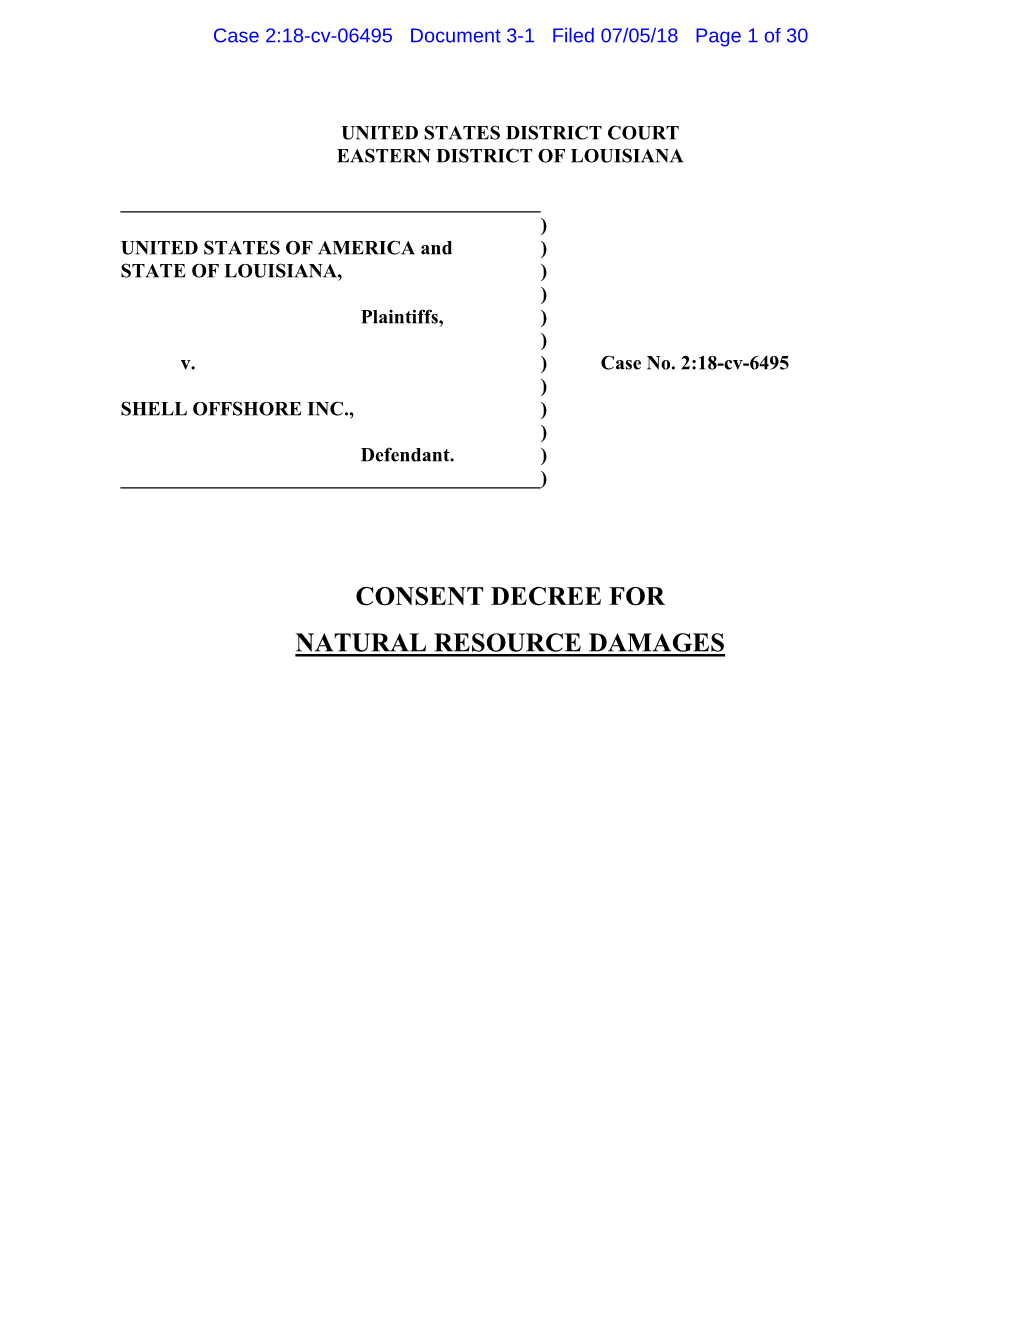 CONSENT DECREE for NATURAL RESOURCE DAMAGES Case 2:18-Cv-06495 Document 3-1 Filed 07/05/18 Page 2 of 30